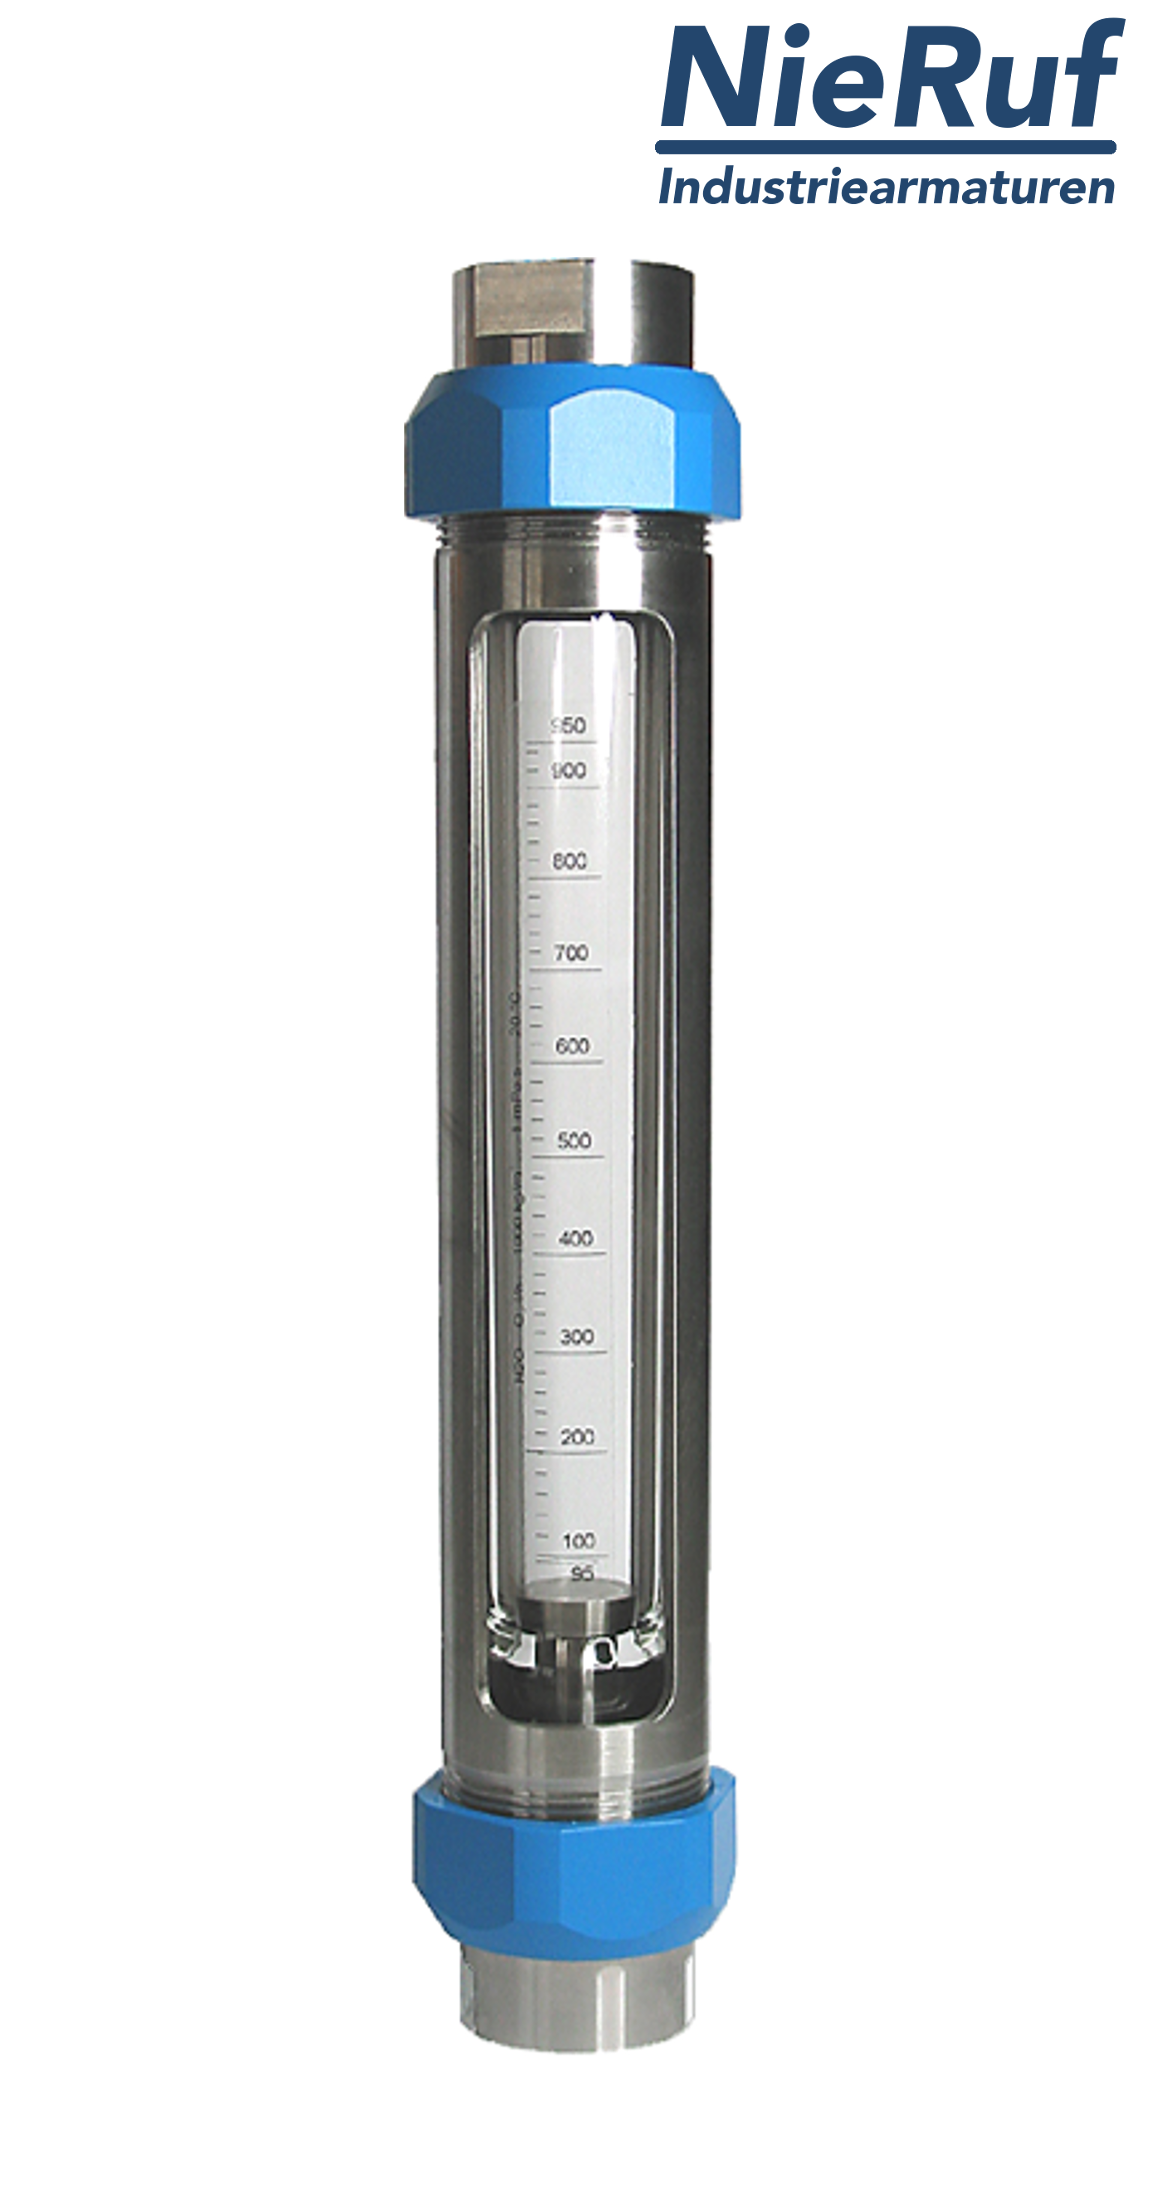 Variable area flowmeter stainless steel + borosilicate 1/4" inch 50.0 - 500.0 l/h water EPDM